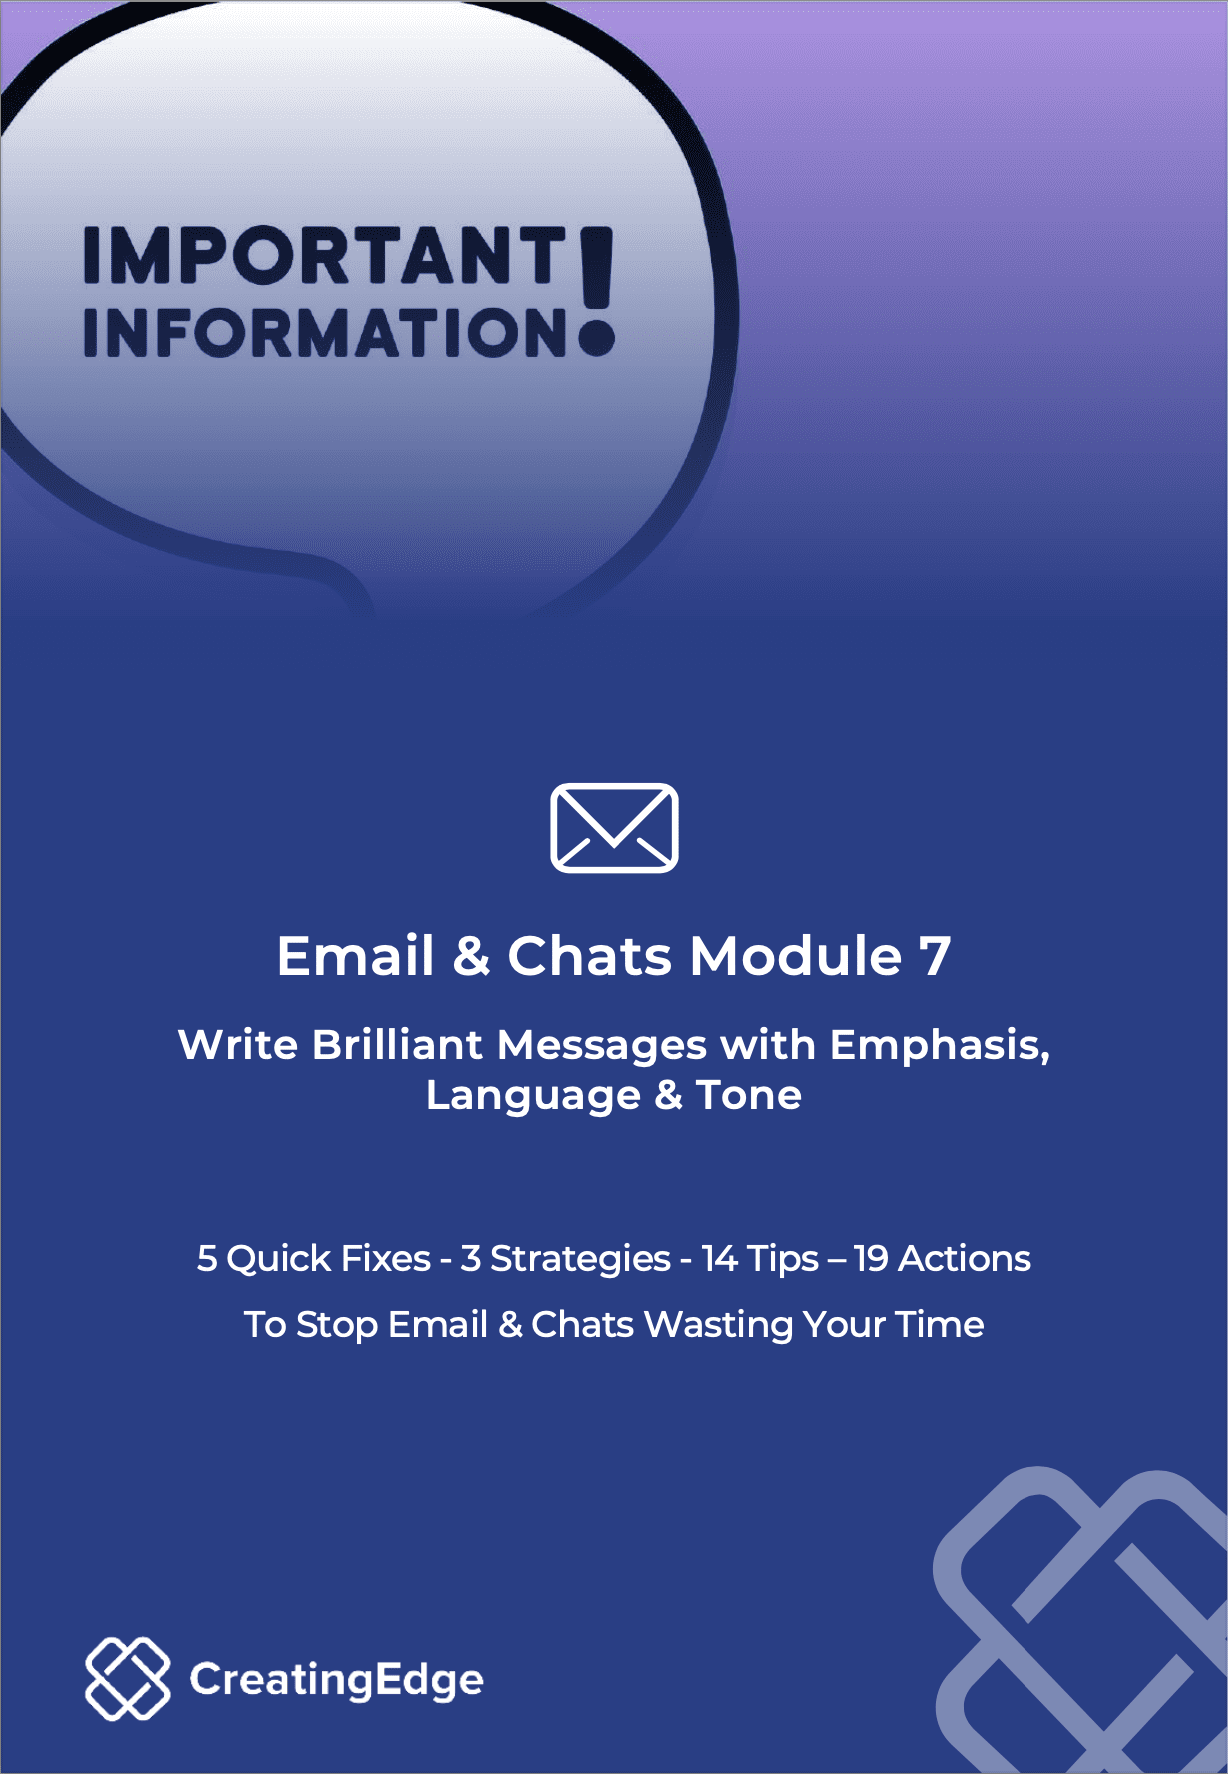 Email & Chats